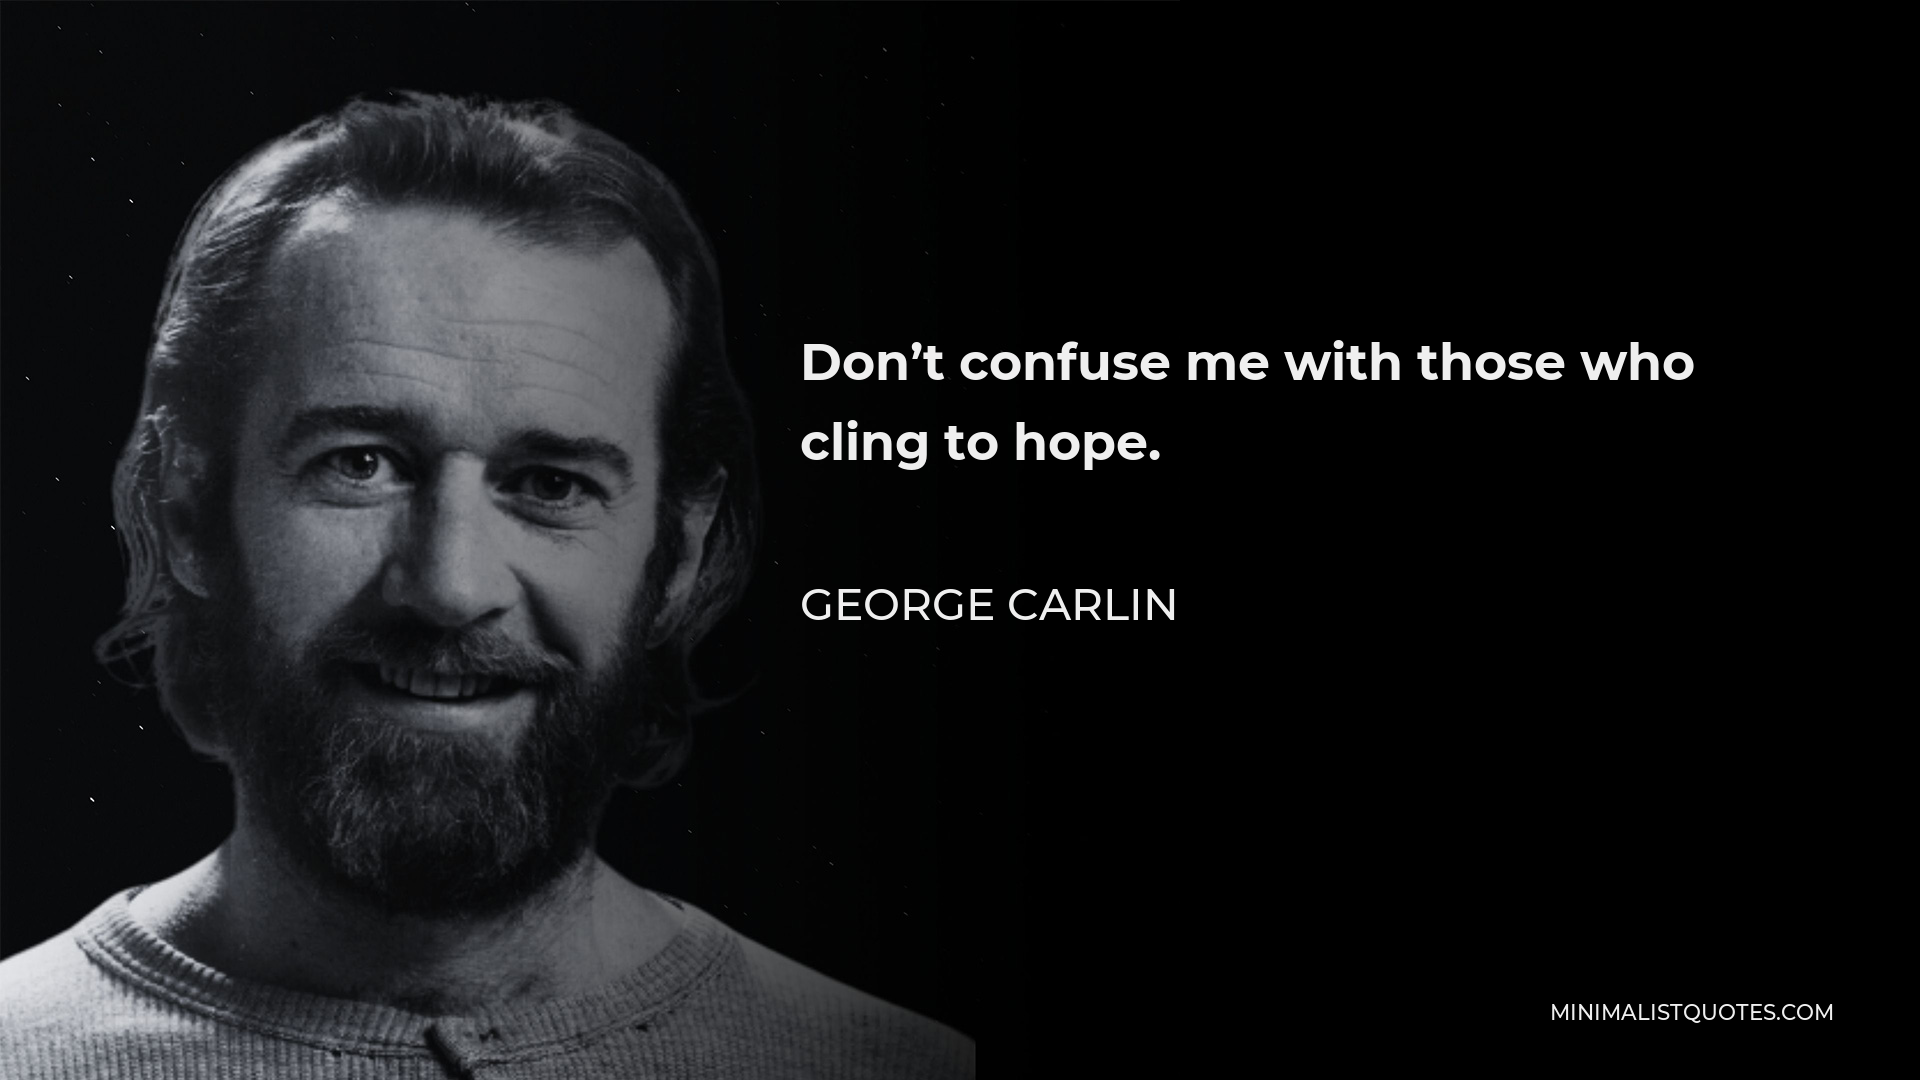 George Carlin Quote - Don’t confuse me with those who cling to hope.